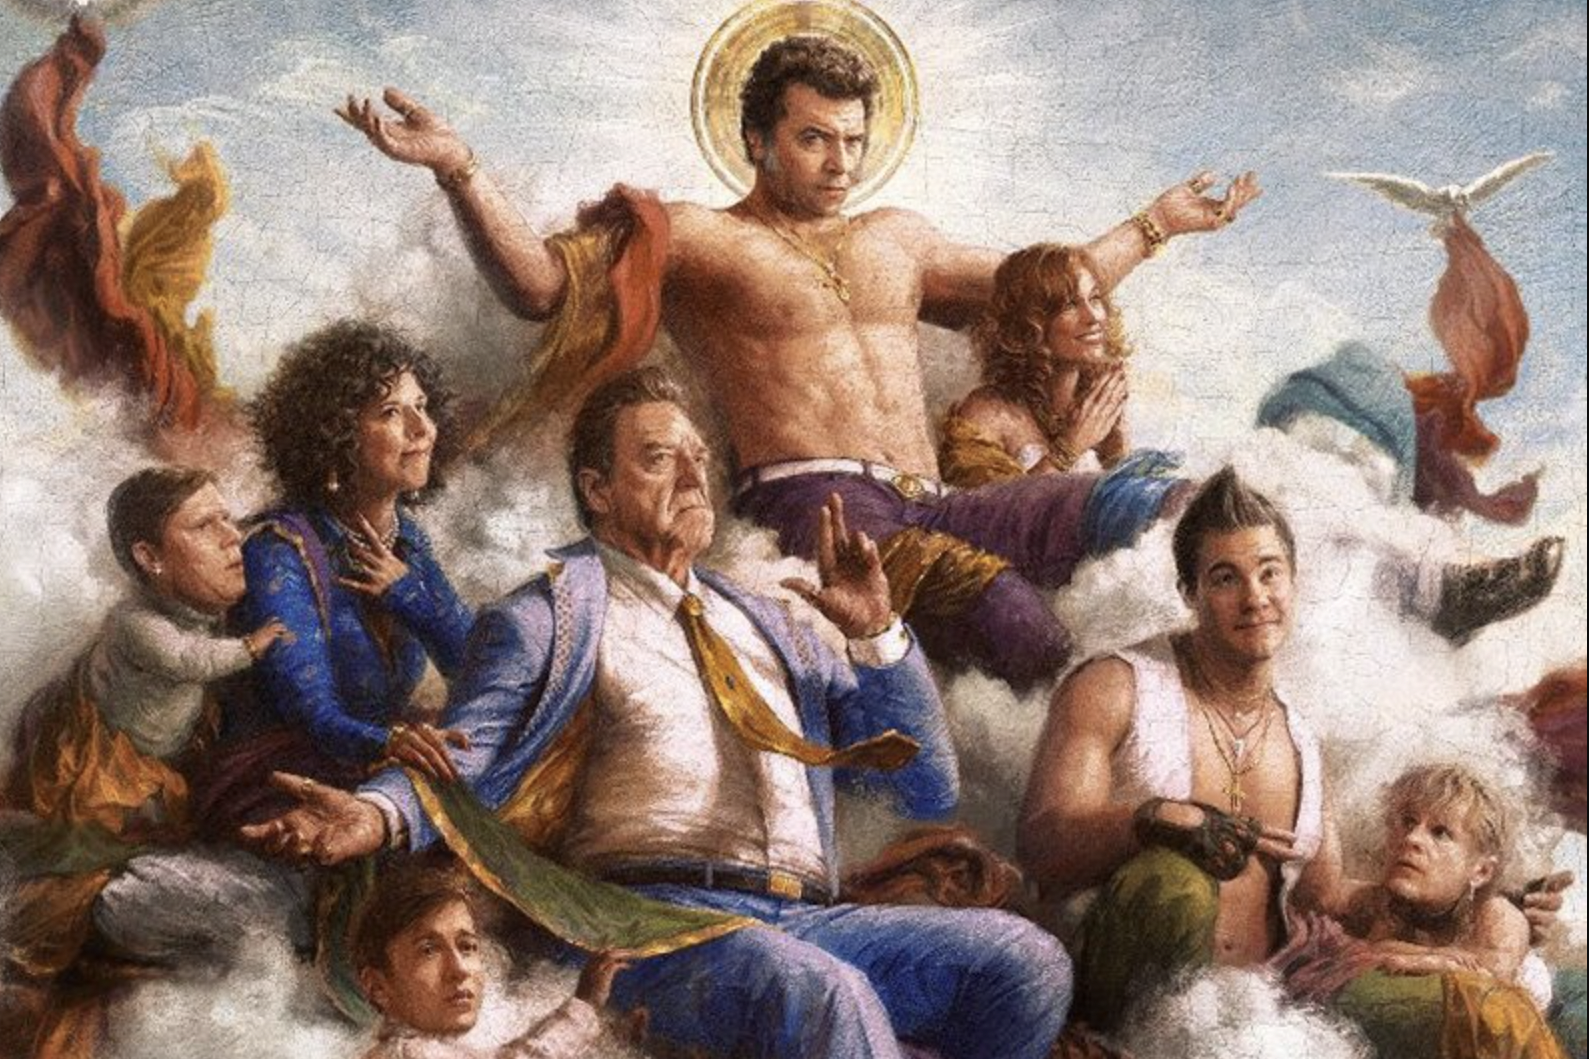 An illustration of several people imitating Christian imagery.